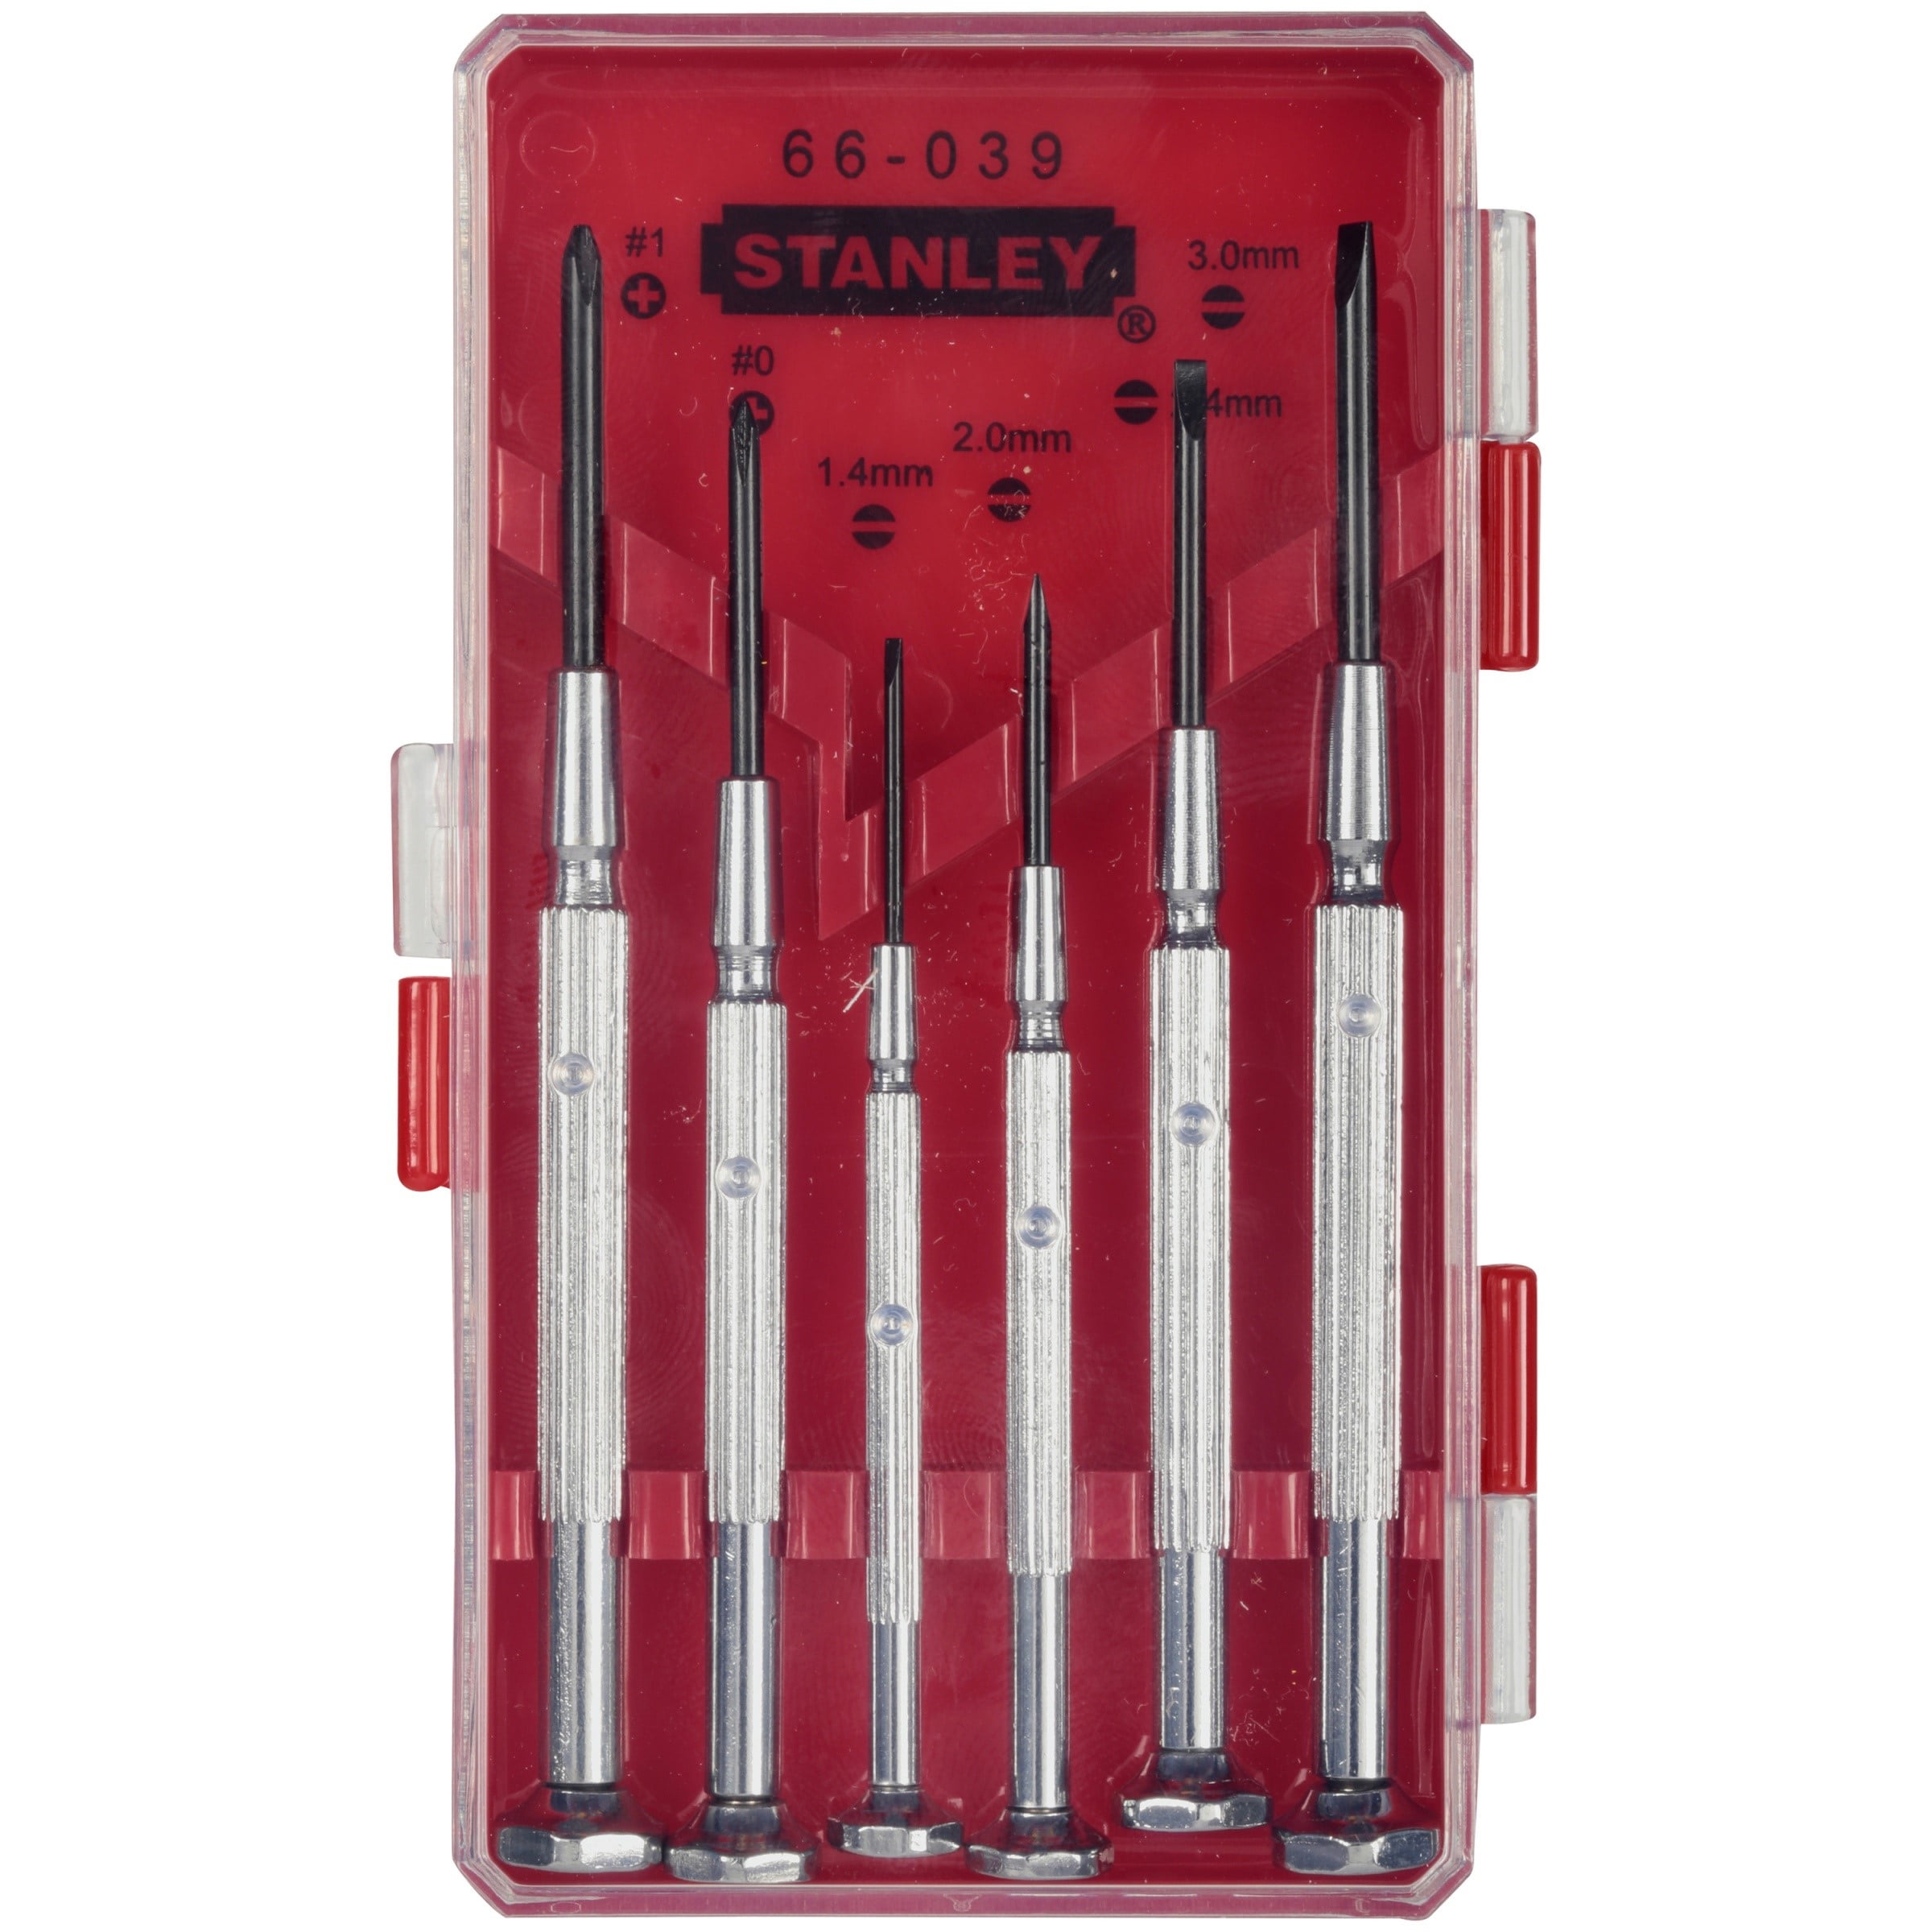 5 Pieces Watchmakers Jewelers Screwdrivers Set with 5 Replacement Tips